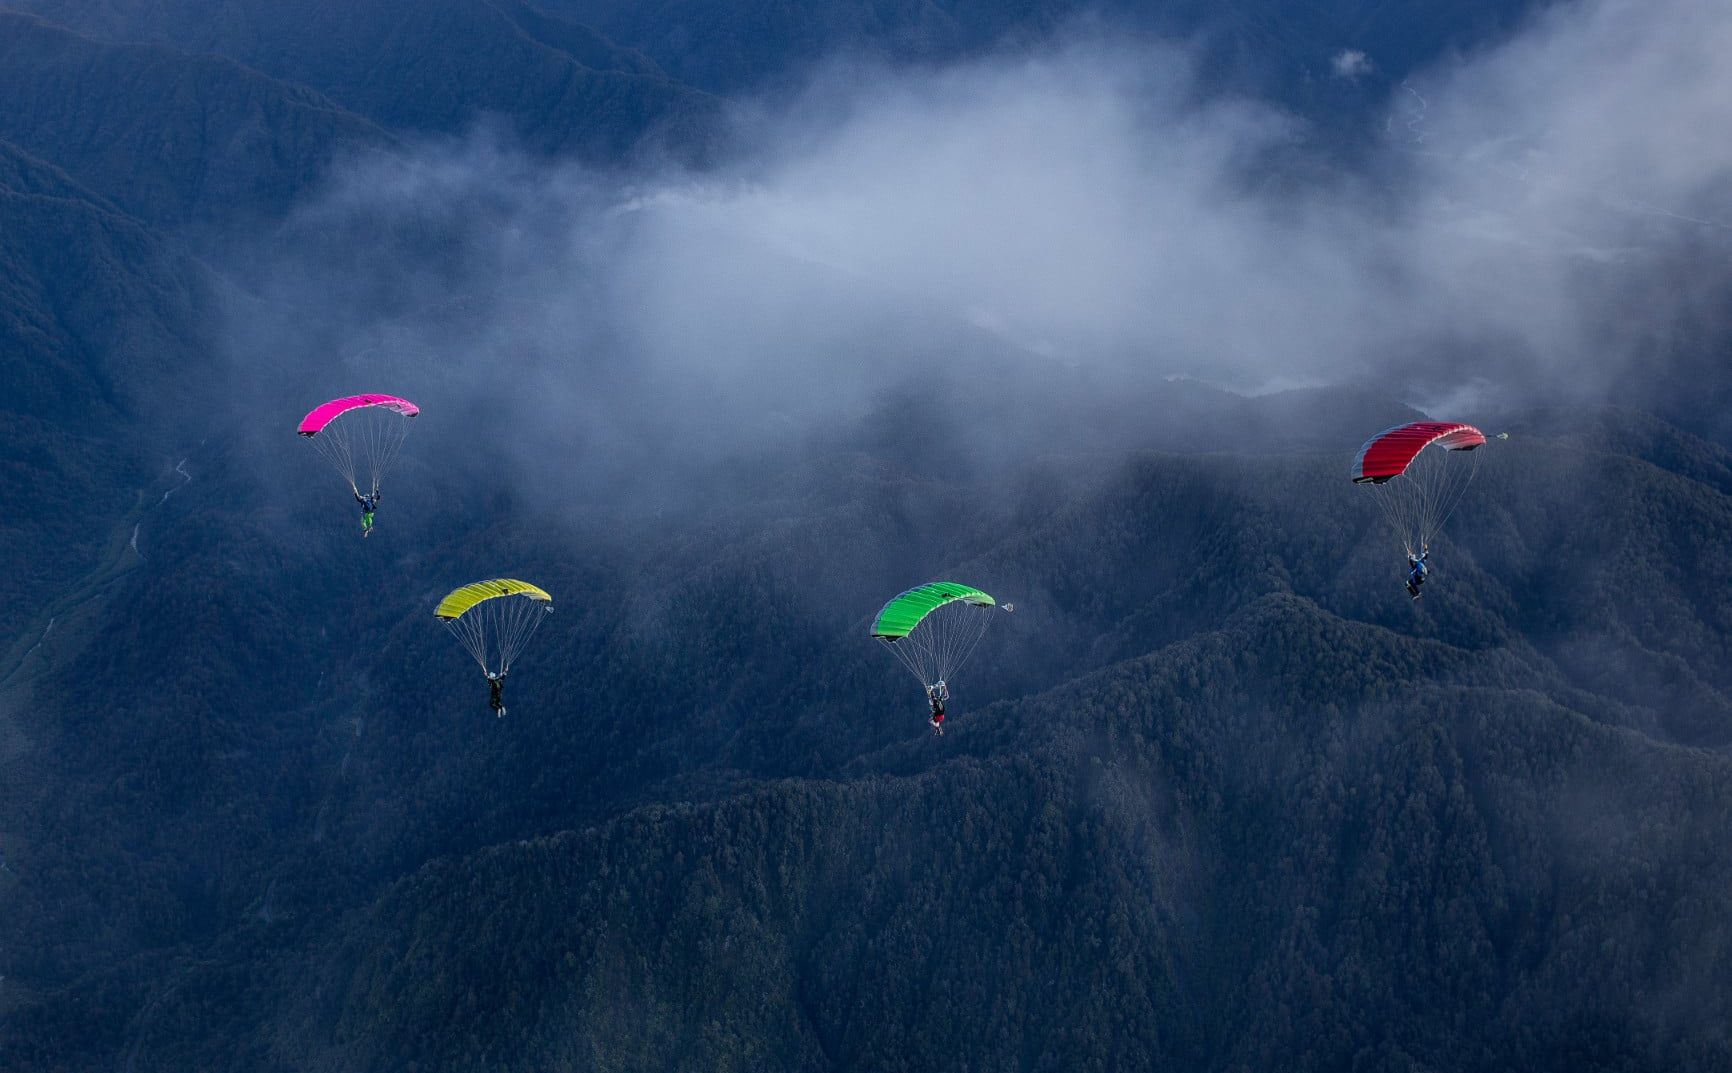 crossfire-3-gallery-images-canopies-flying-over-mountains-and-forest-pink-yellow-green-red